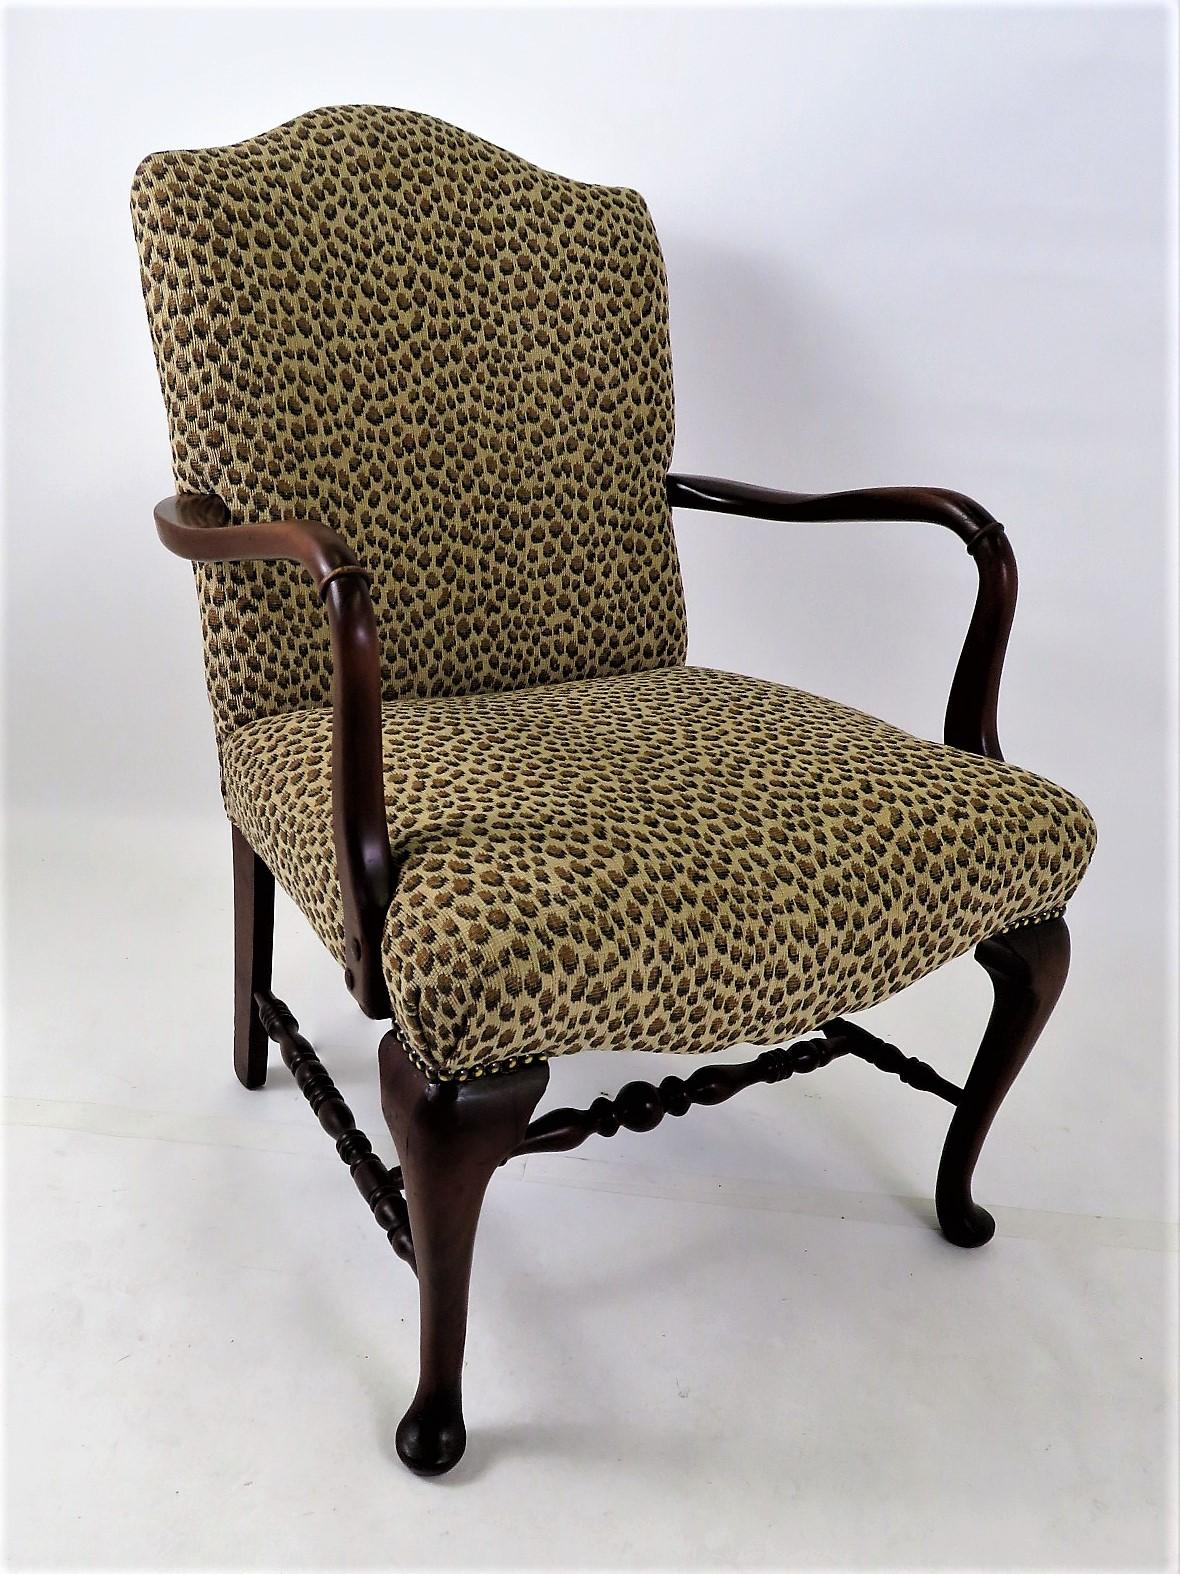 Carved 1940s American Queen Anne Style Armchair in Leopard